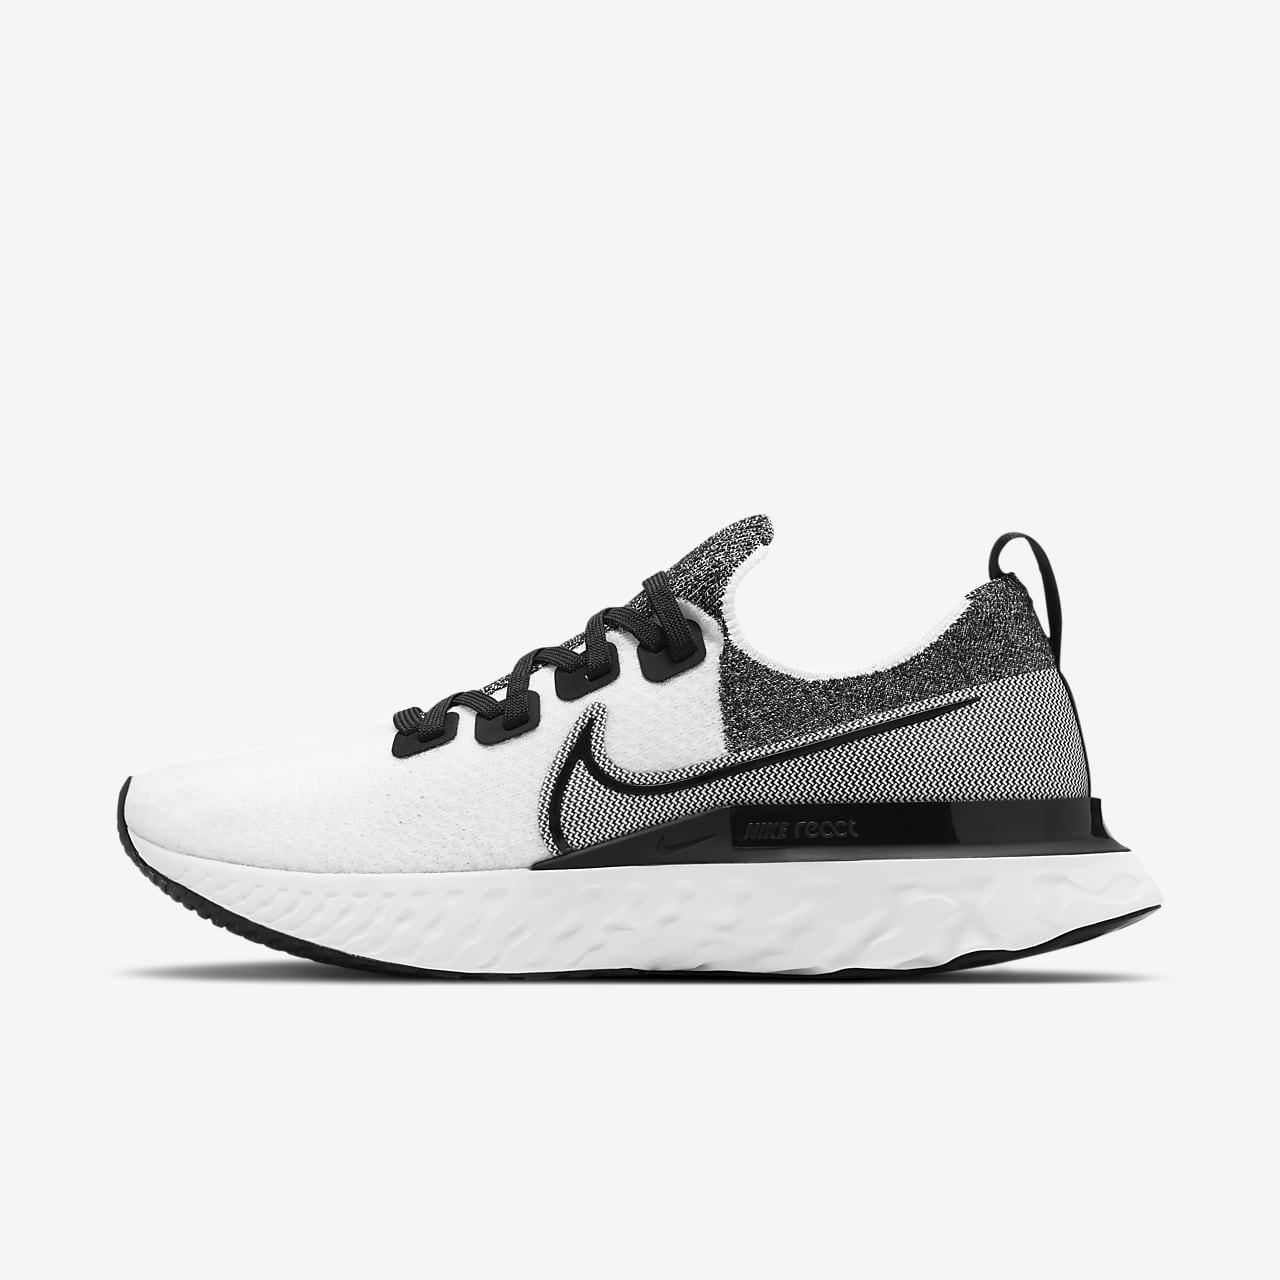 nike motion control running shoes mens